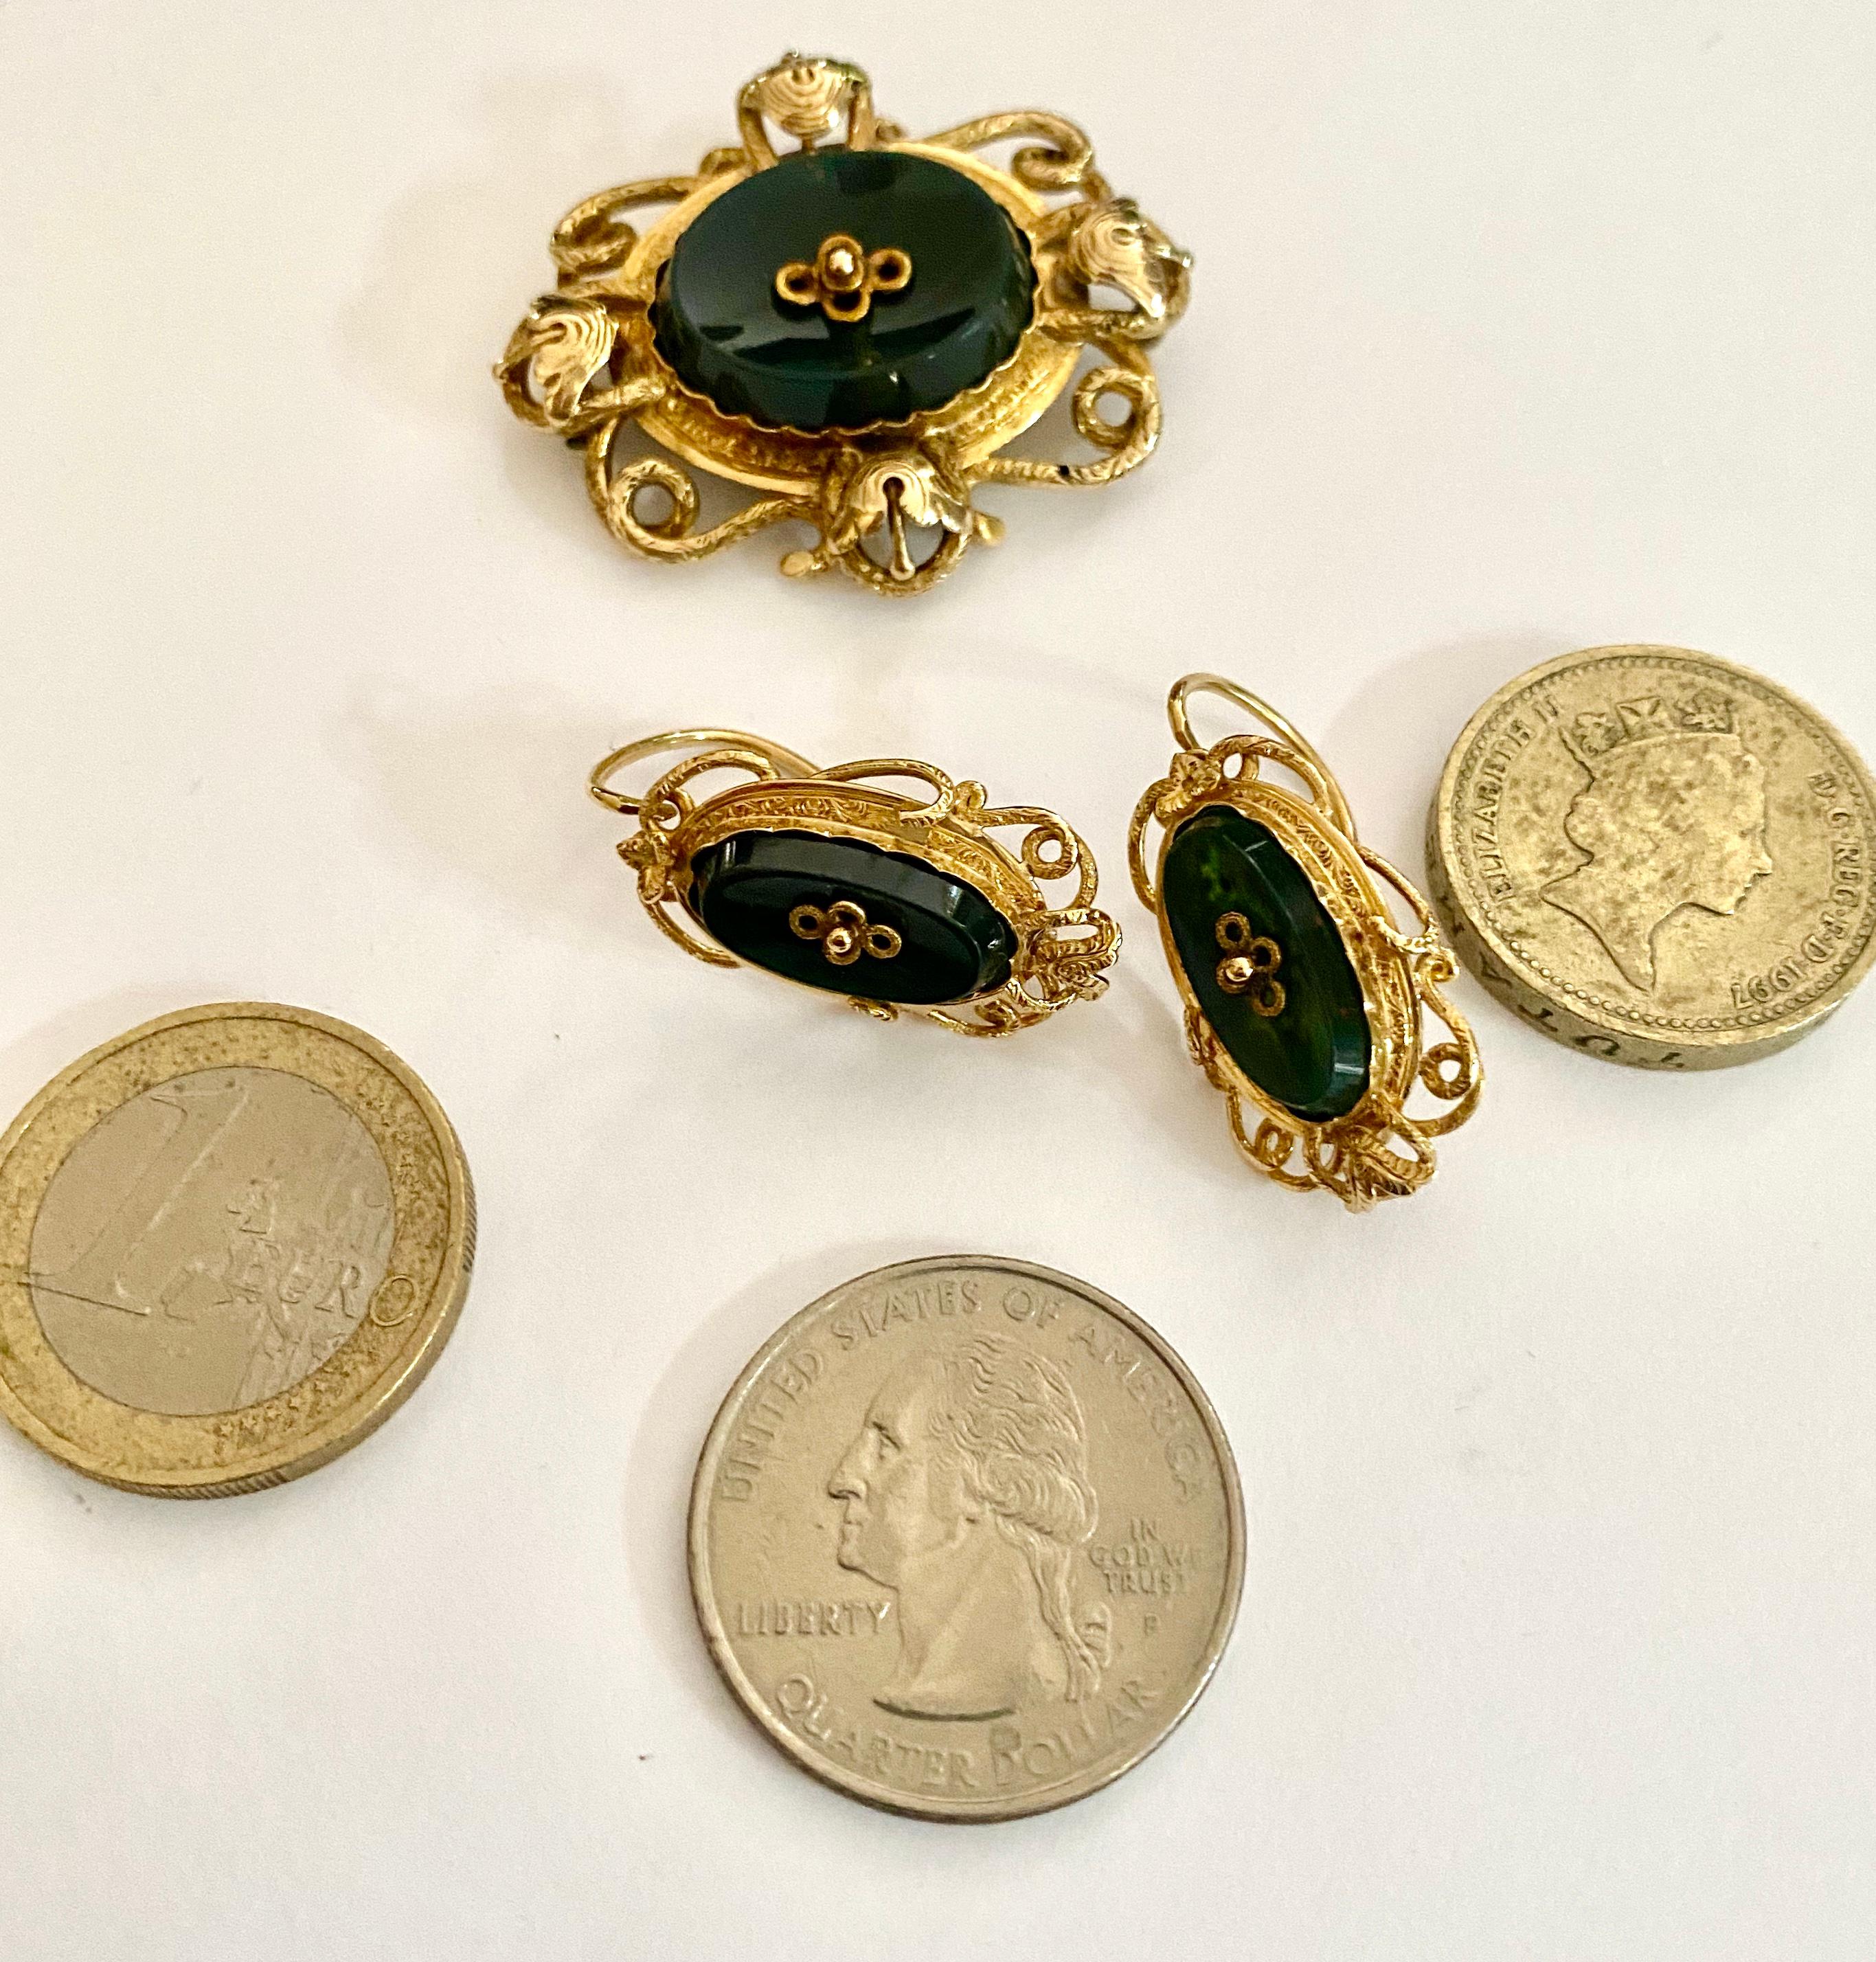 Petit Parure, 18 Karat Yellow Gold Boche and Earrings, Brussels  1850 For Sale 5